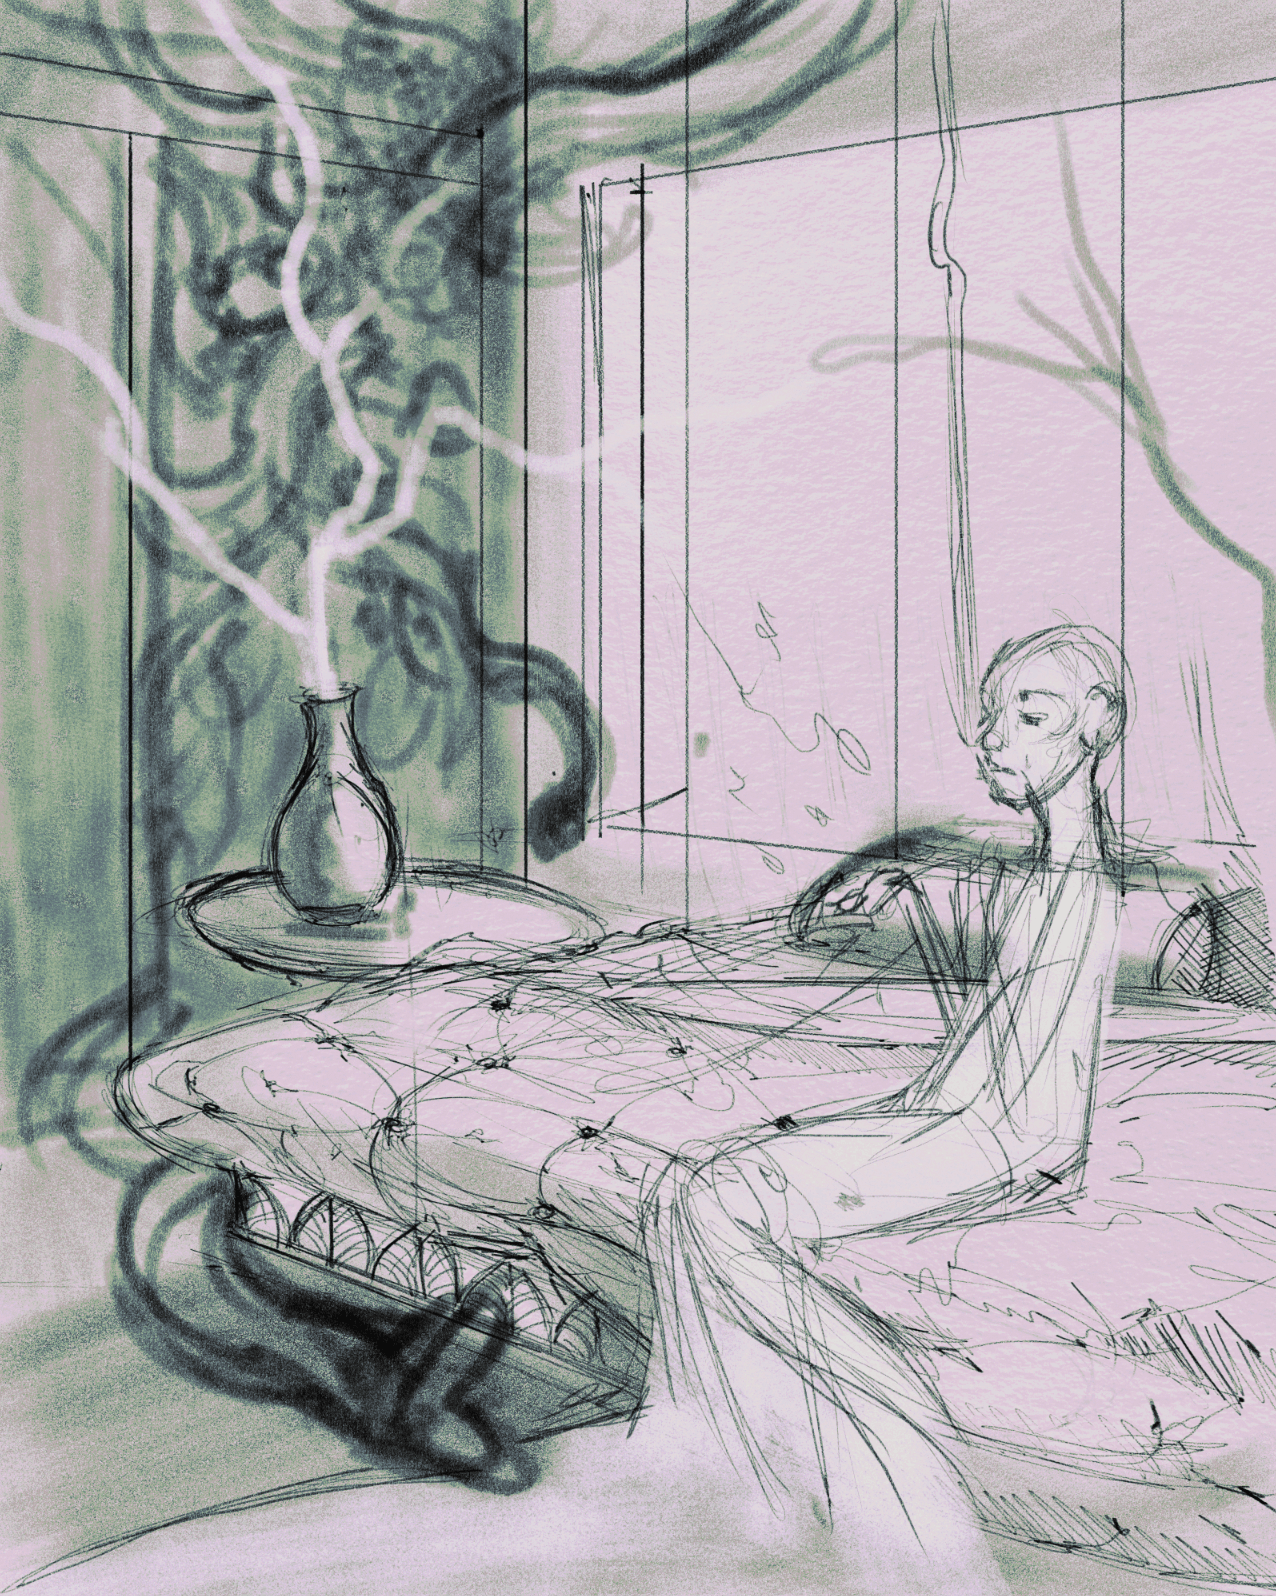 Sketch of a woman smoking a cigarette on an elaborate bed.